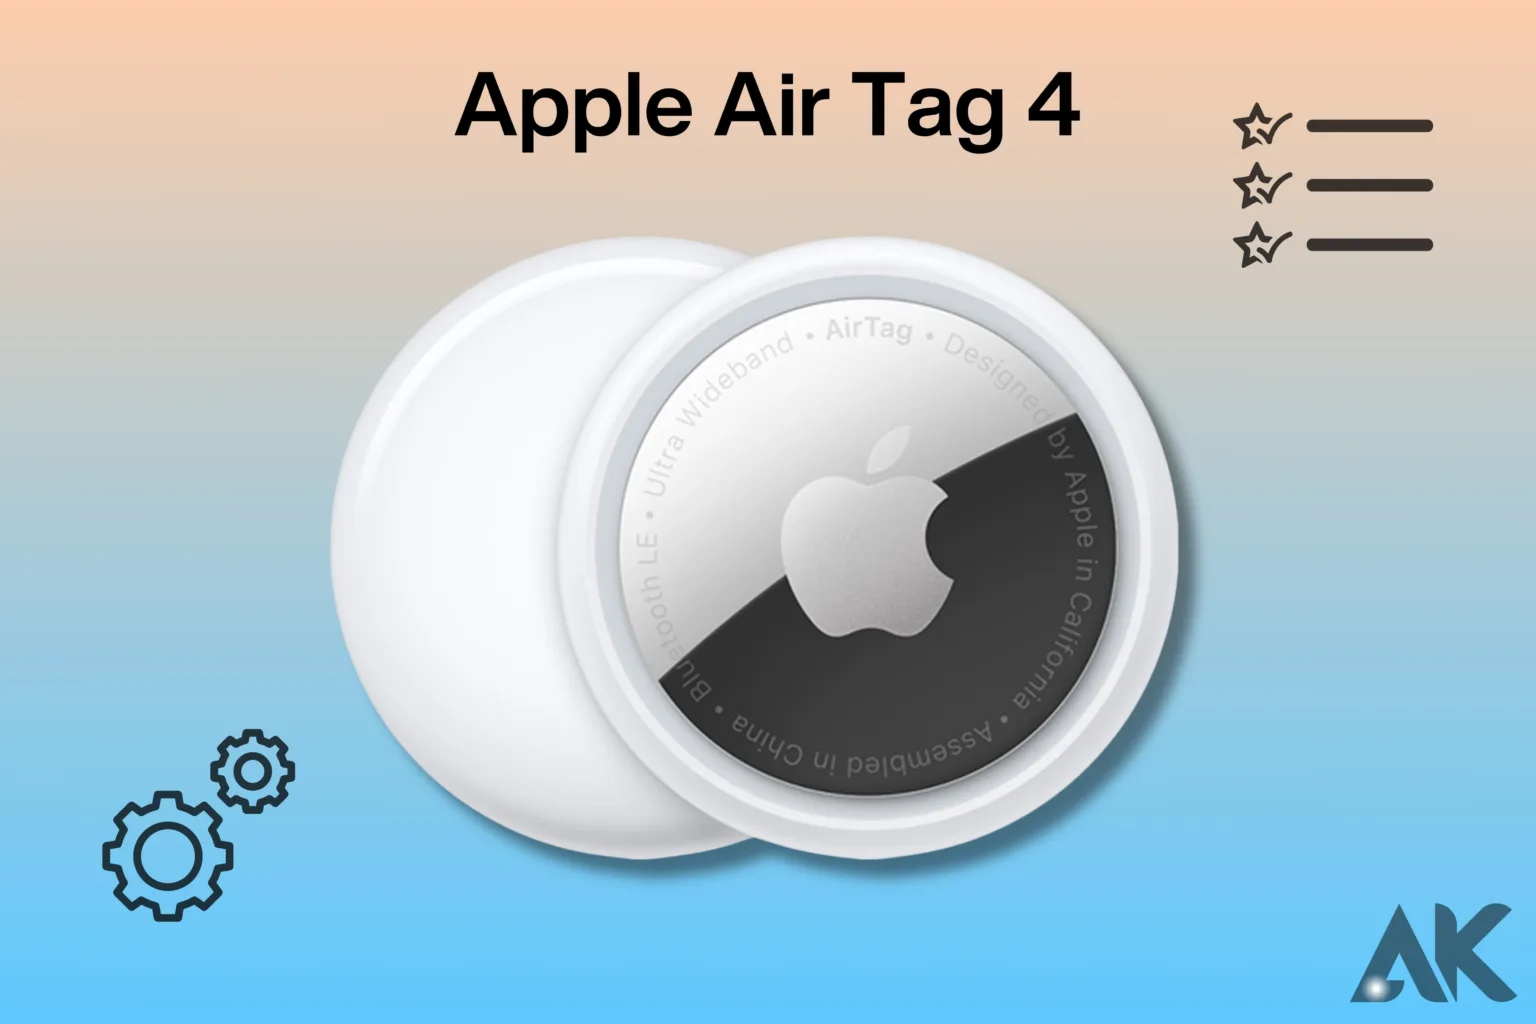 Apple Air Tag 4 features